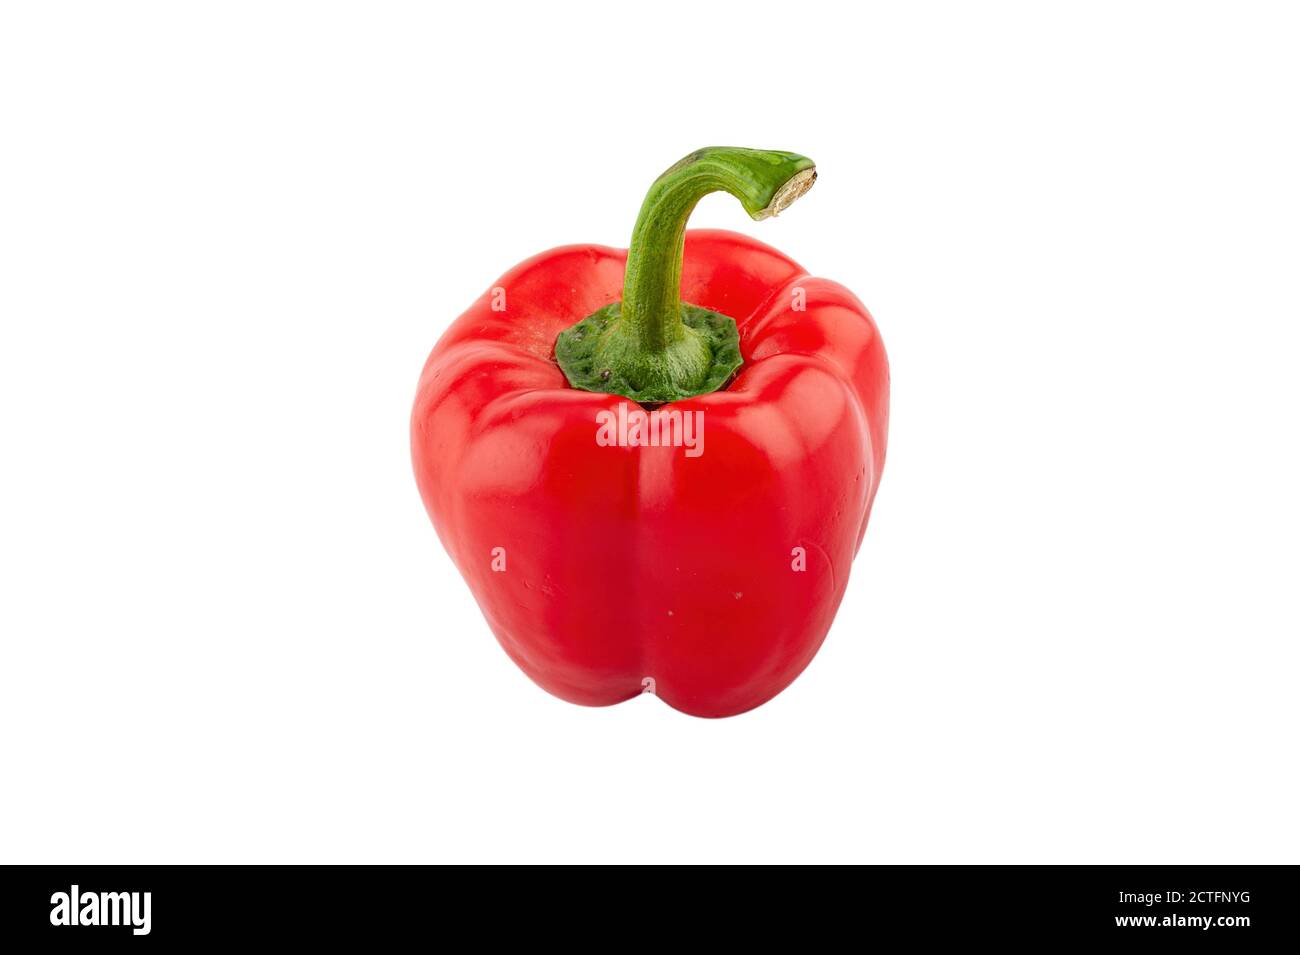 Red bell pepper isolated on white background. Stock Photo